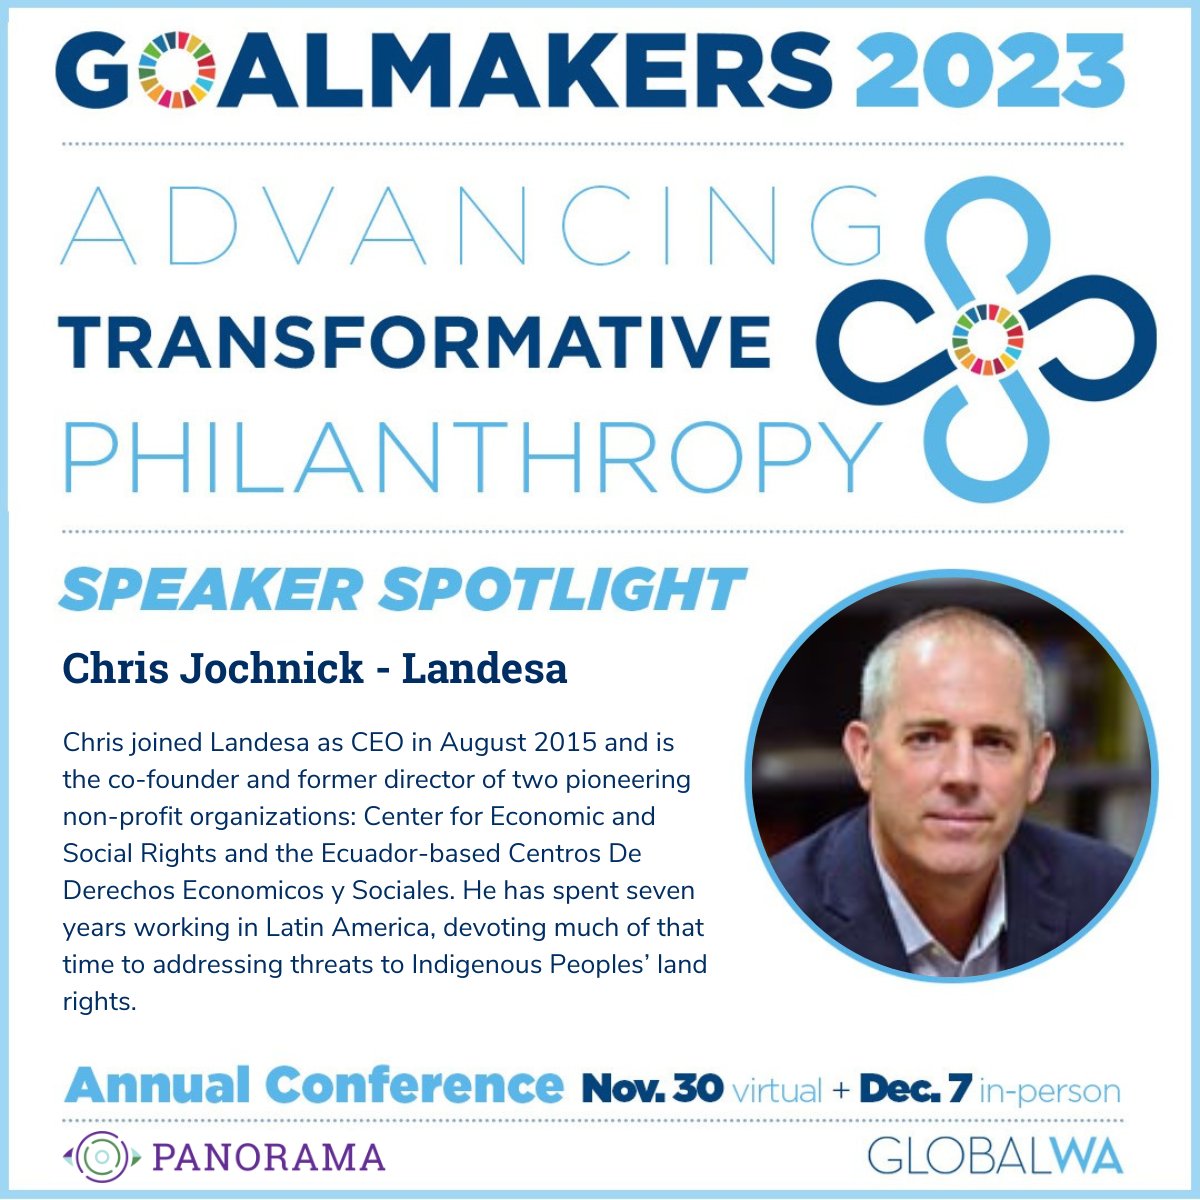 We’re excited to introduce Chris Jochnick, CEO of @Landesa_Global, as another of our panelists at our session at #Goalmakers2023. Chris is a global land rights expert and social entrepreneur.

Register for the conference here: bit.ly/3sAXJTb @GlobalWA